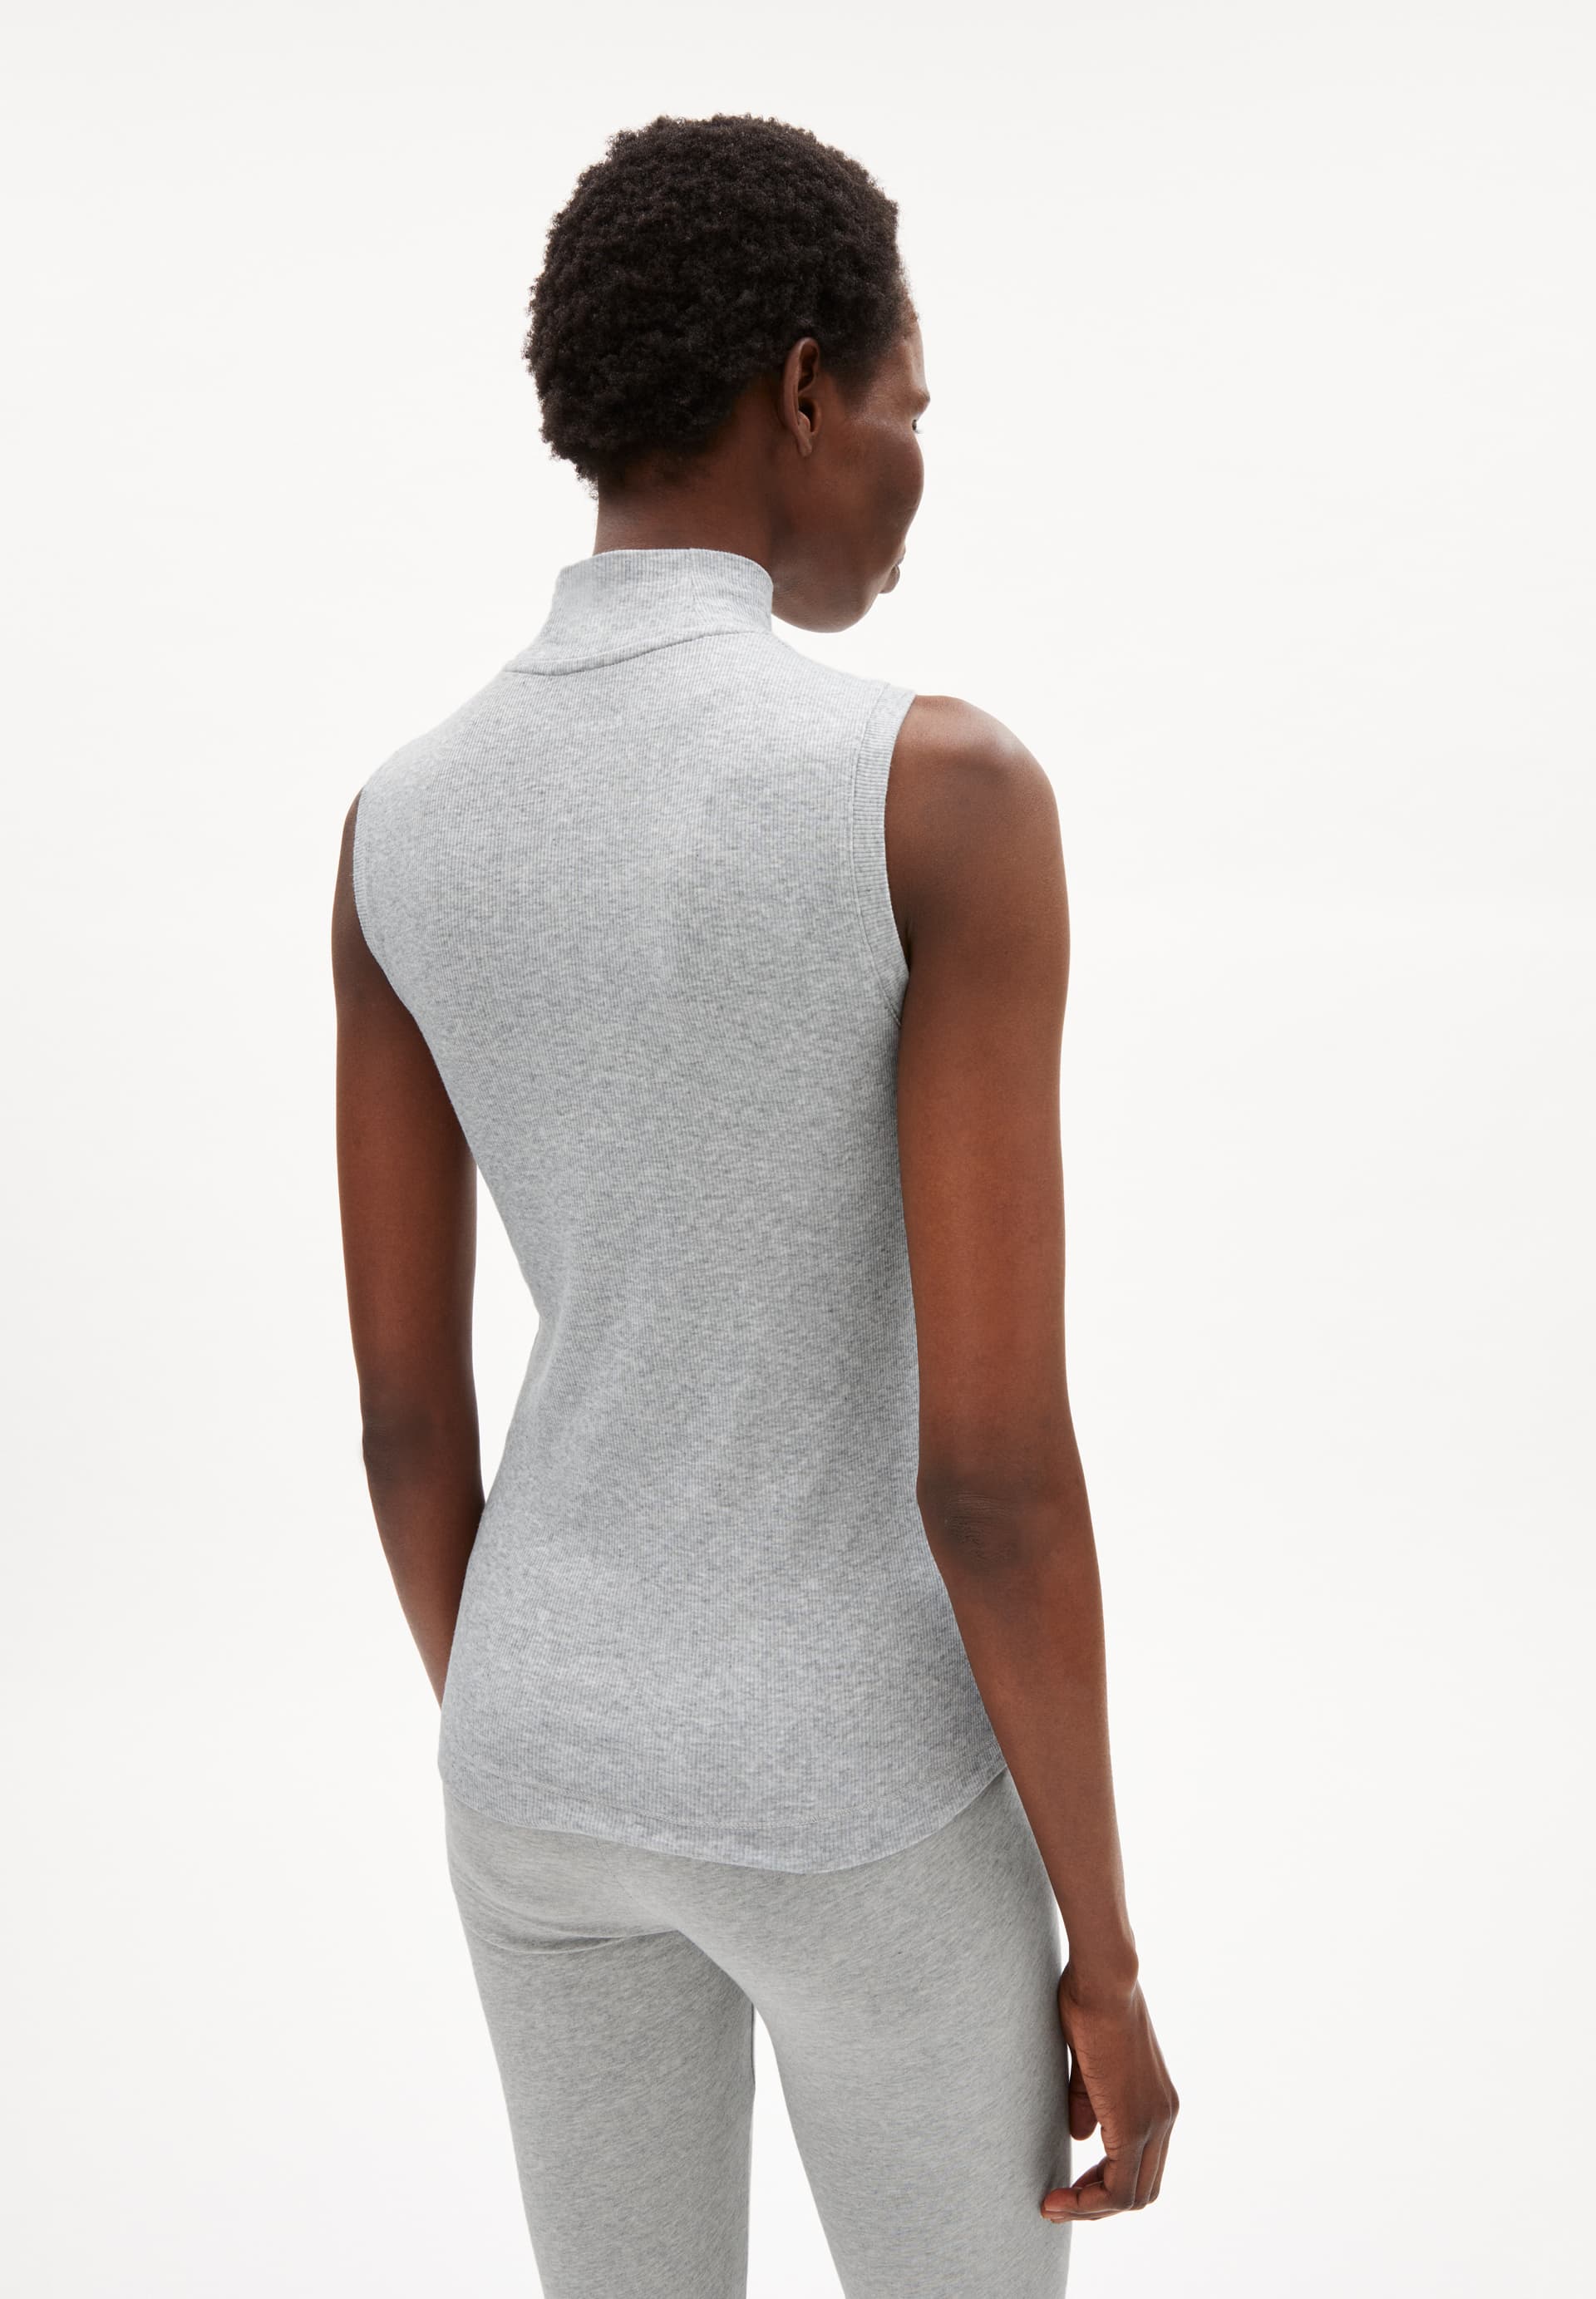 CILIAA Top Slim Fit made of TENCEL™ Lyocell Mix